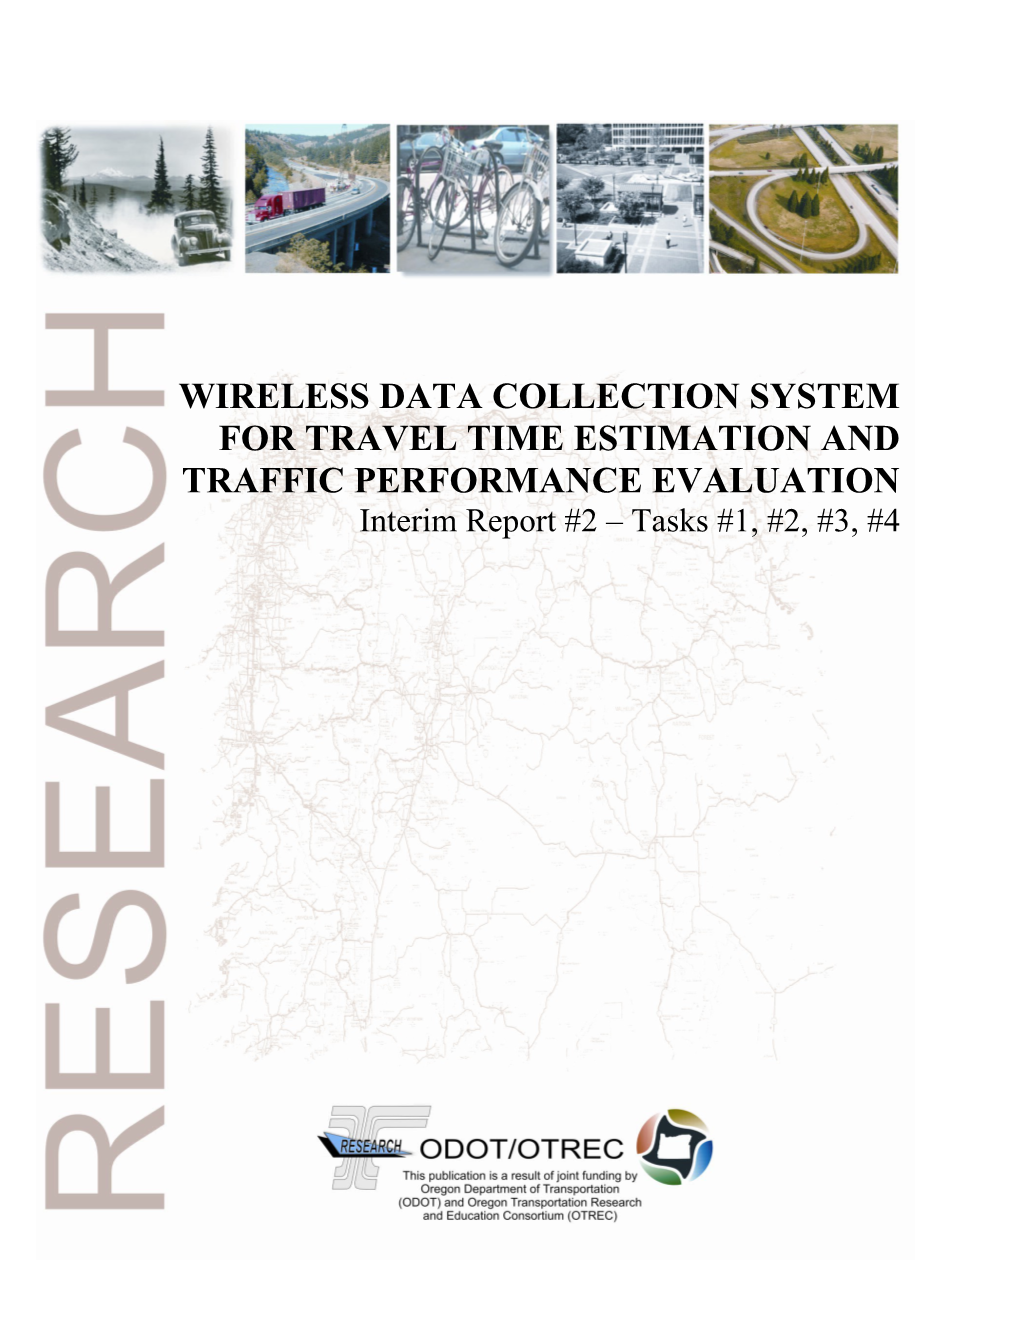 Wireless Data Collection System for Travel Time Estimation and Traffic Performance Evaluation